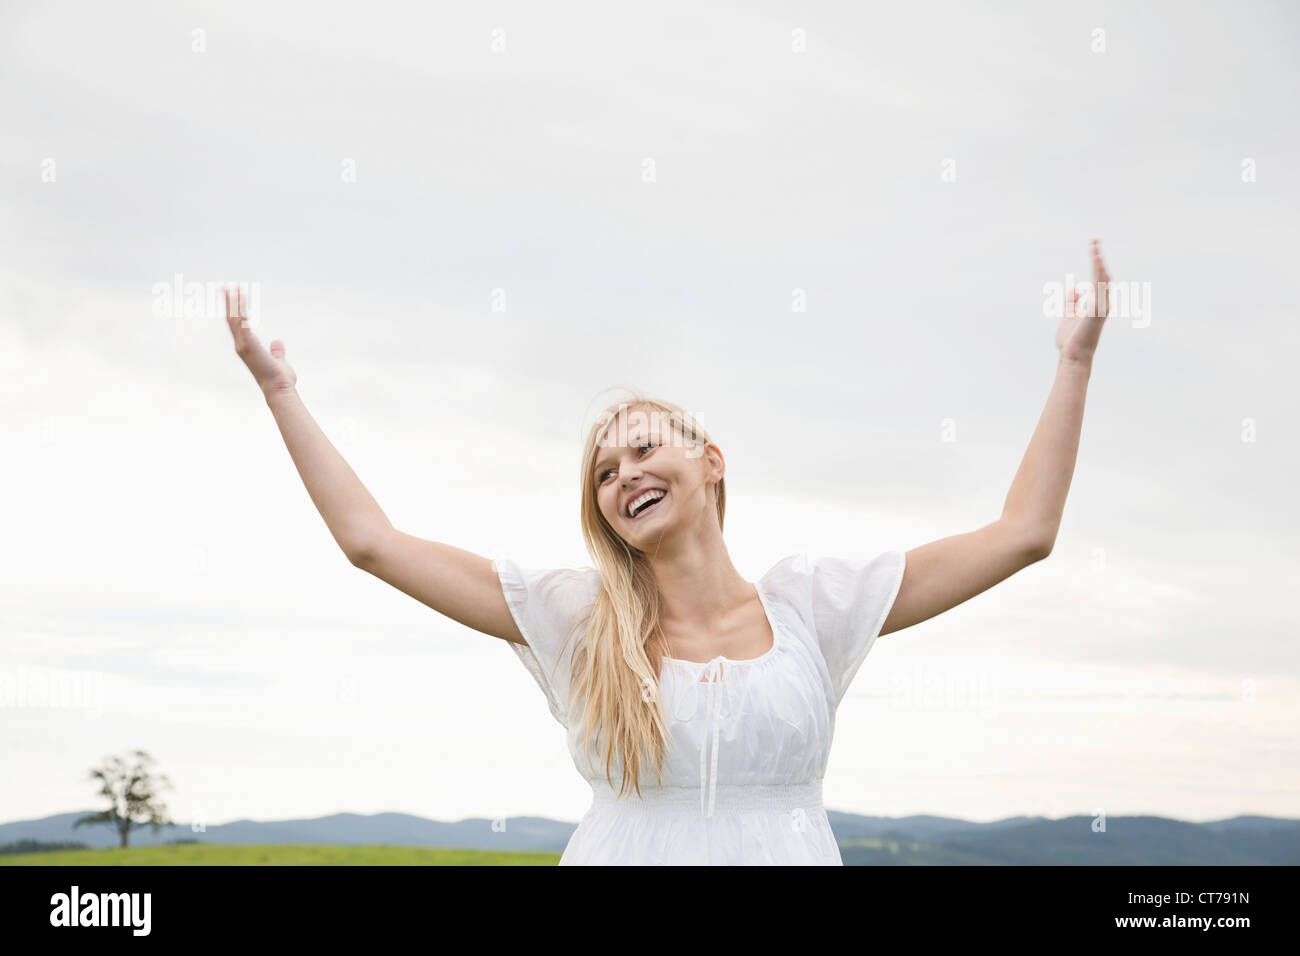 young woman on meadow raising her arms in the air Stock Photo